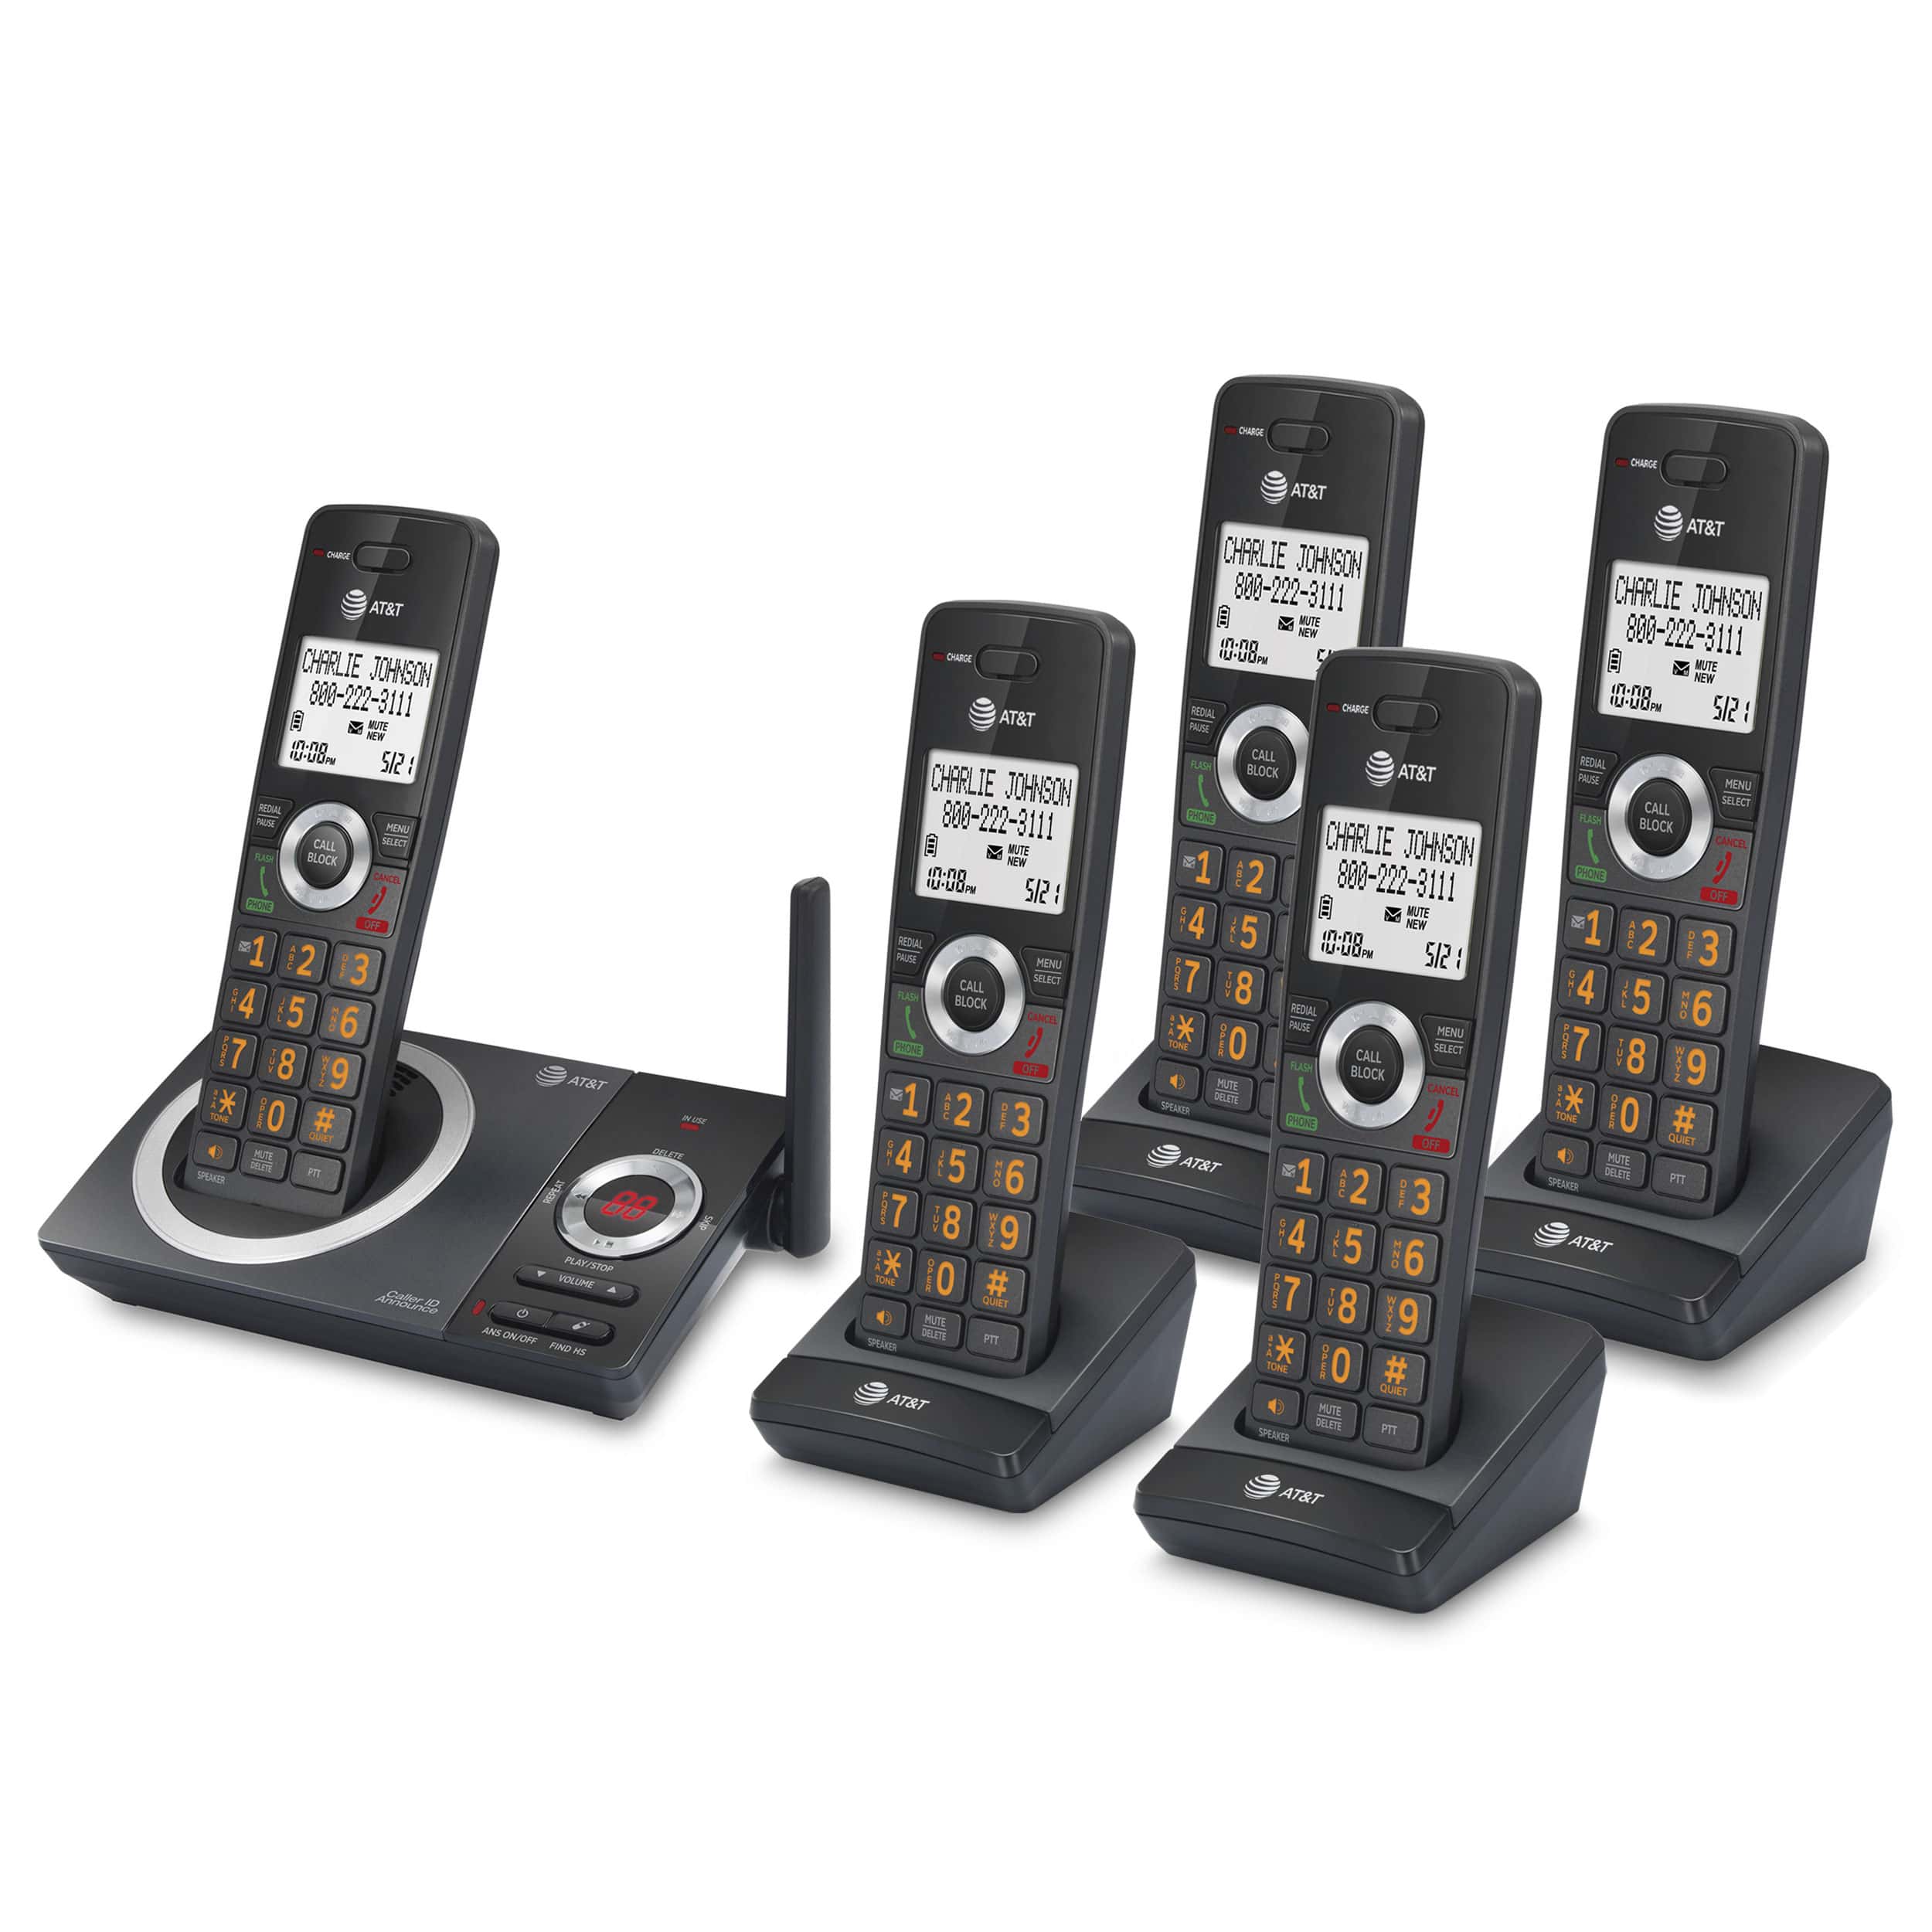 5-Handset Expandable Cordless Phone with Unsurpassed Range, Smart Call Blocker and Answering System - view 2